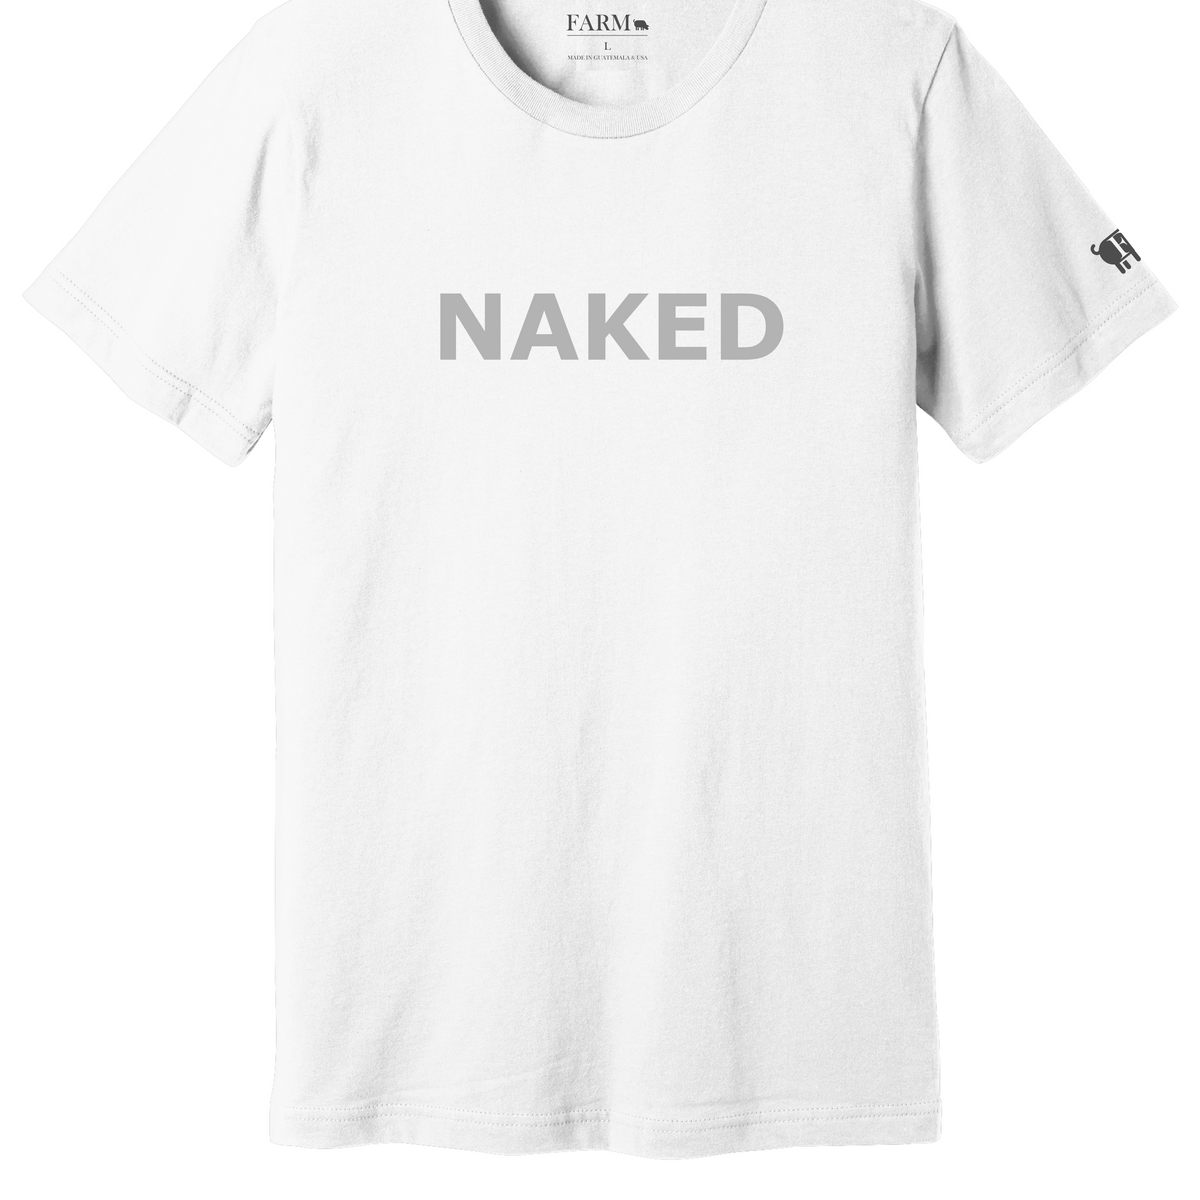 NAKED T-Shirt Adult